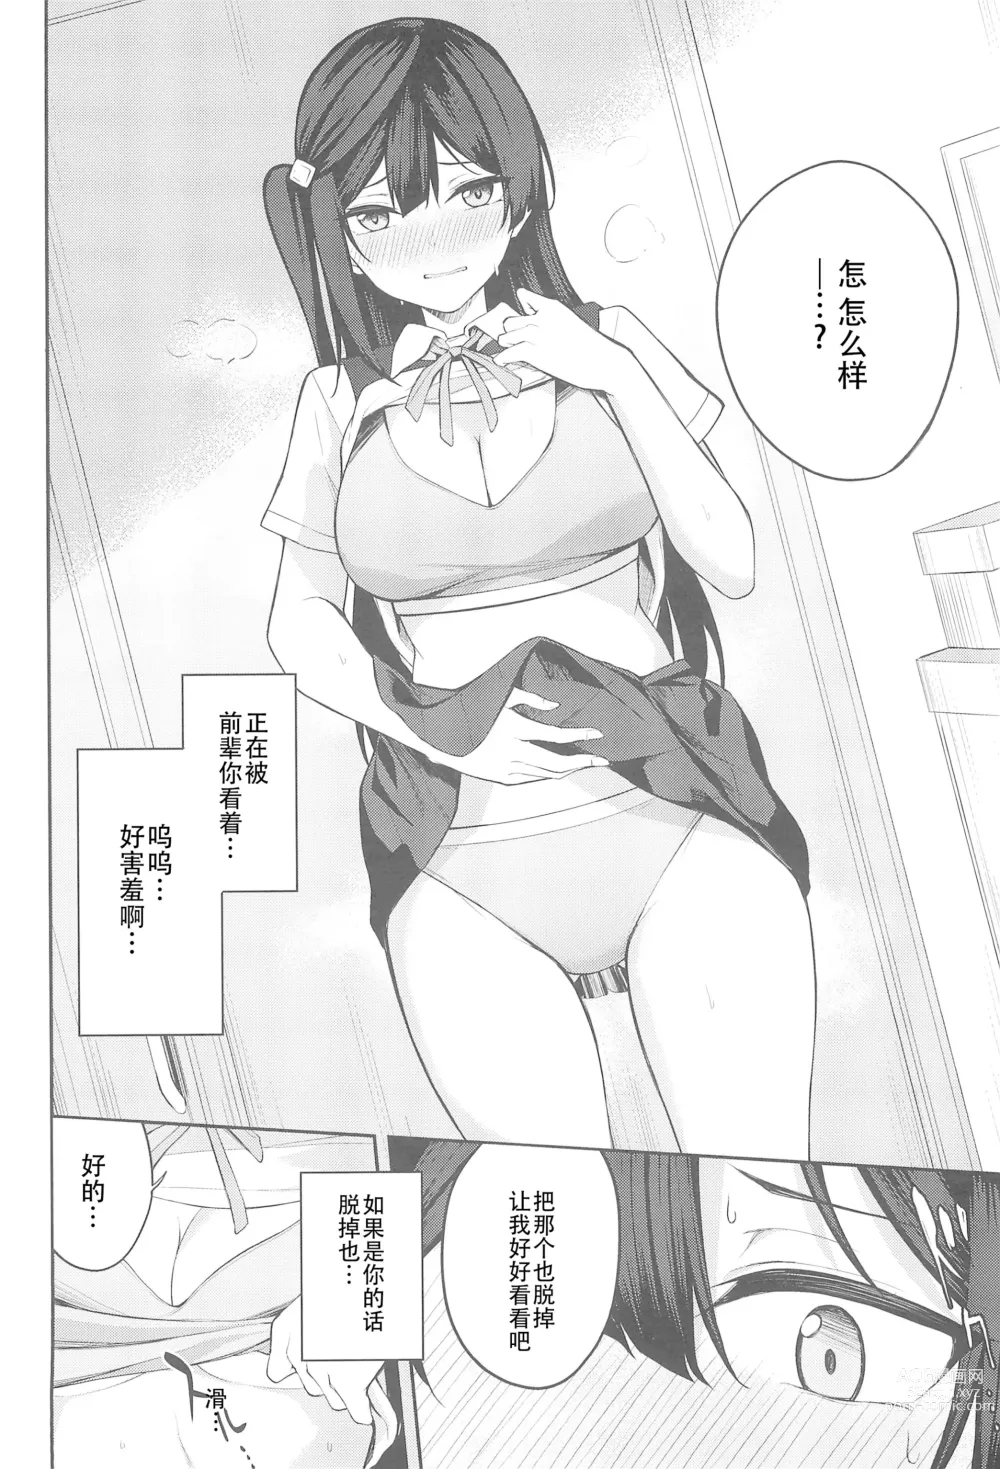 Page 9 of doujinshi Sunny Scarlet